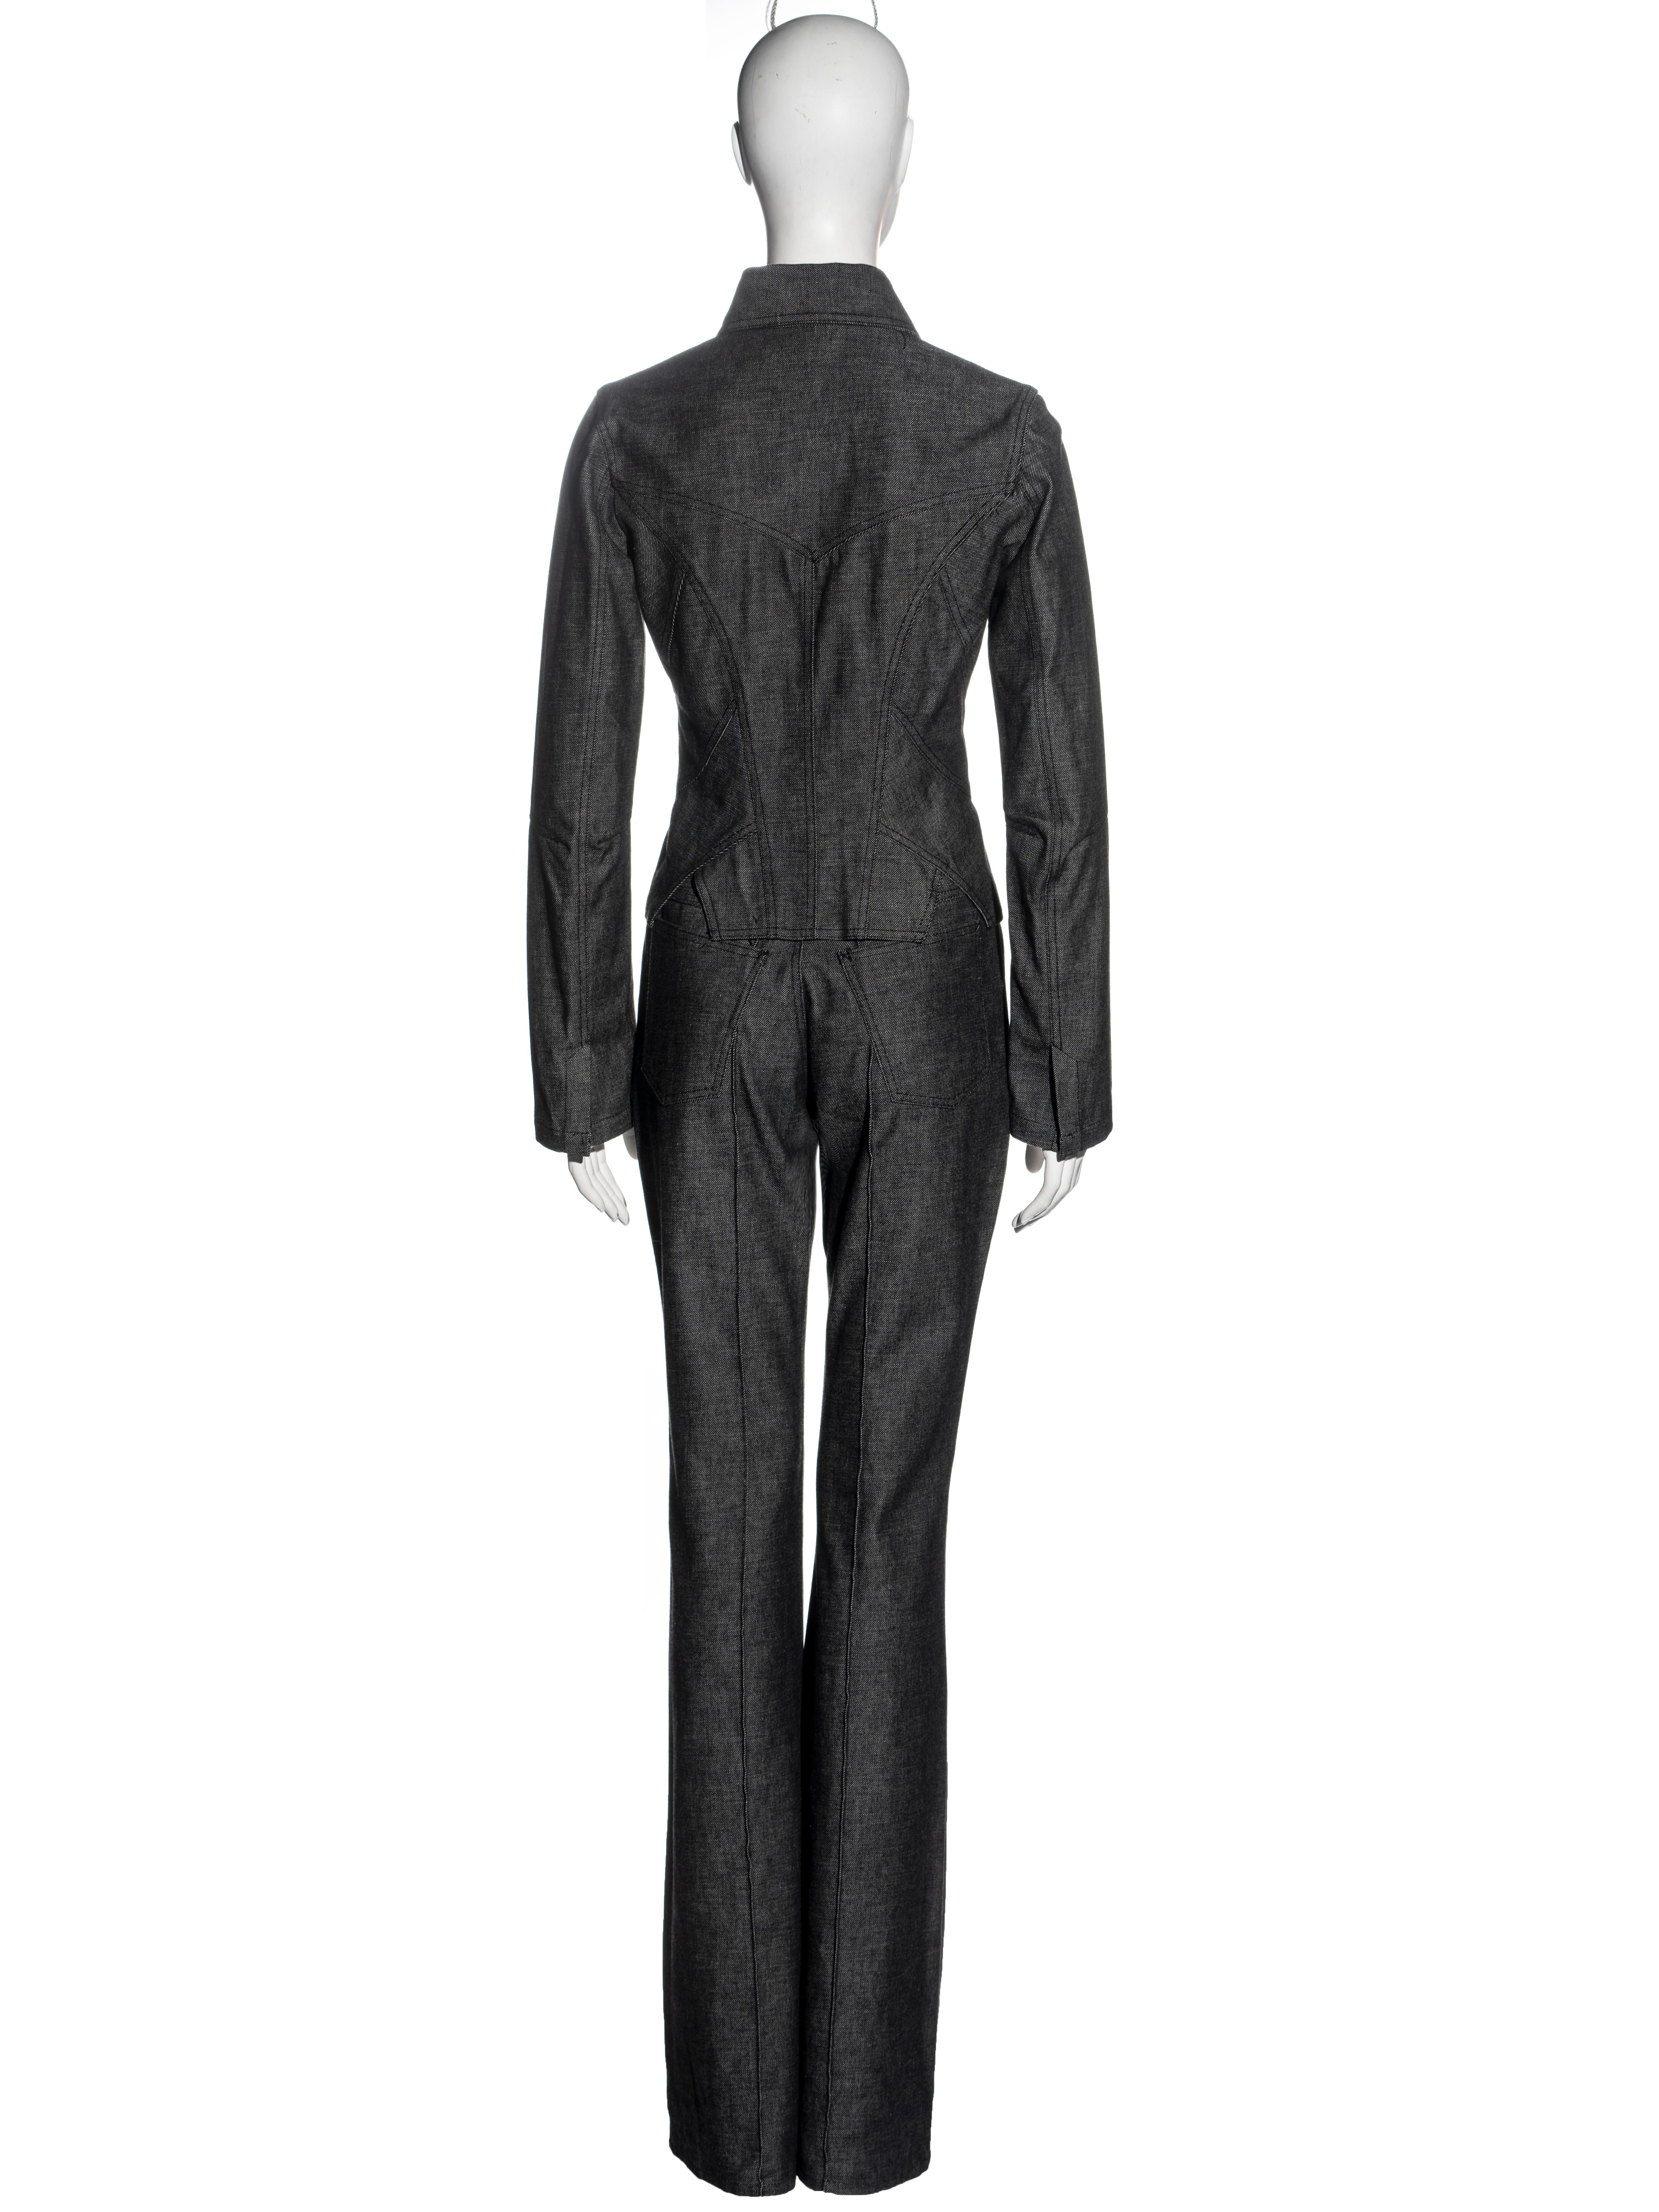 Alexander McQueen grey denim shirt and flared pants, fw 2000 For Sale 1